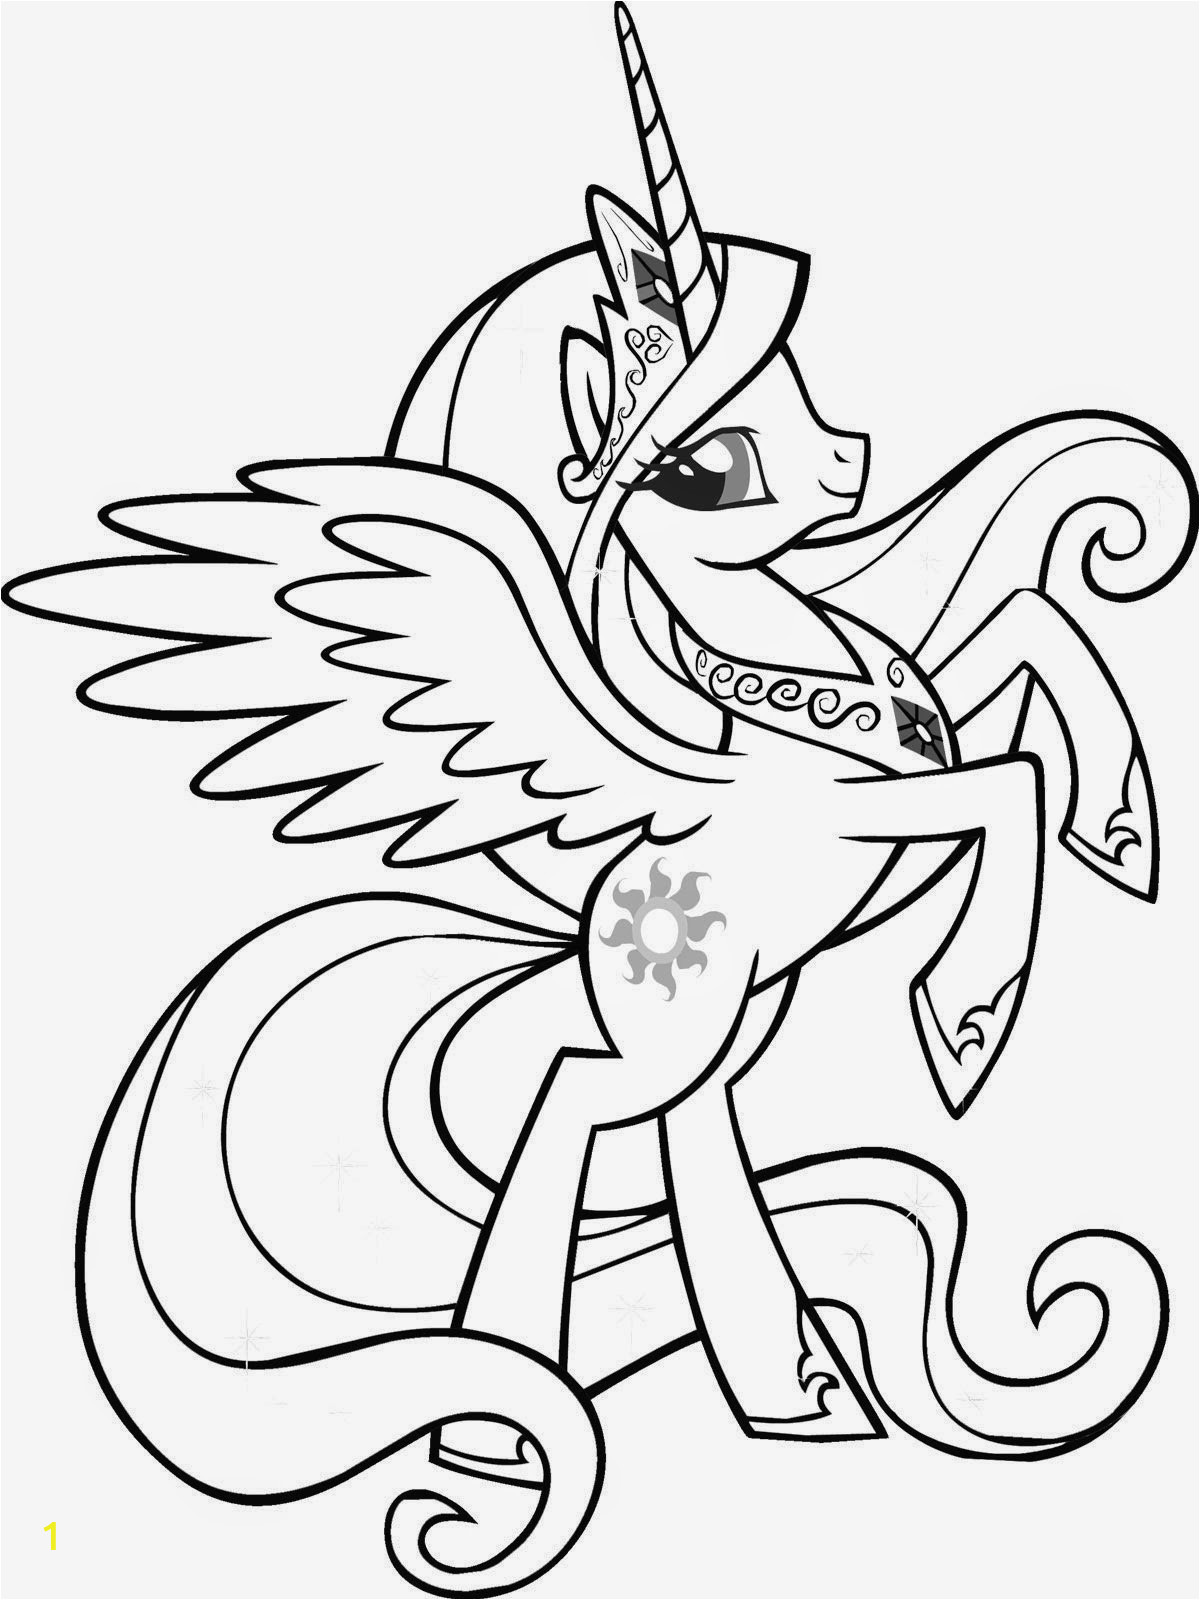 My Little Pony Printable Coloring Pages Coloring Pages My Little Pony Coloring Pages Free and